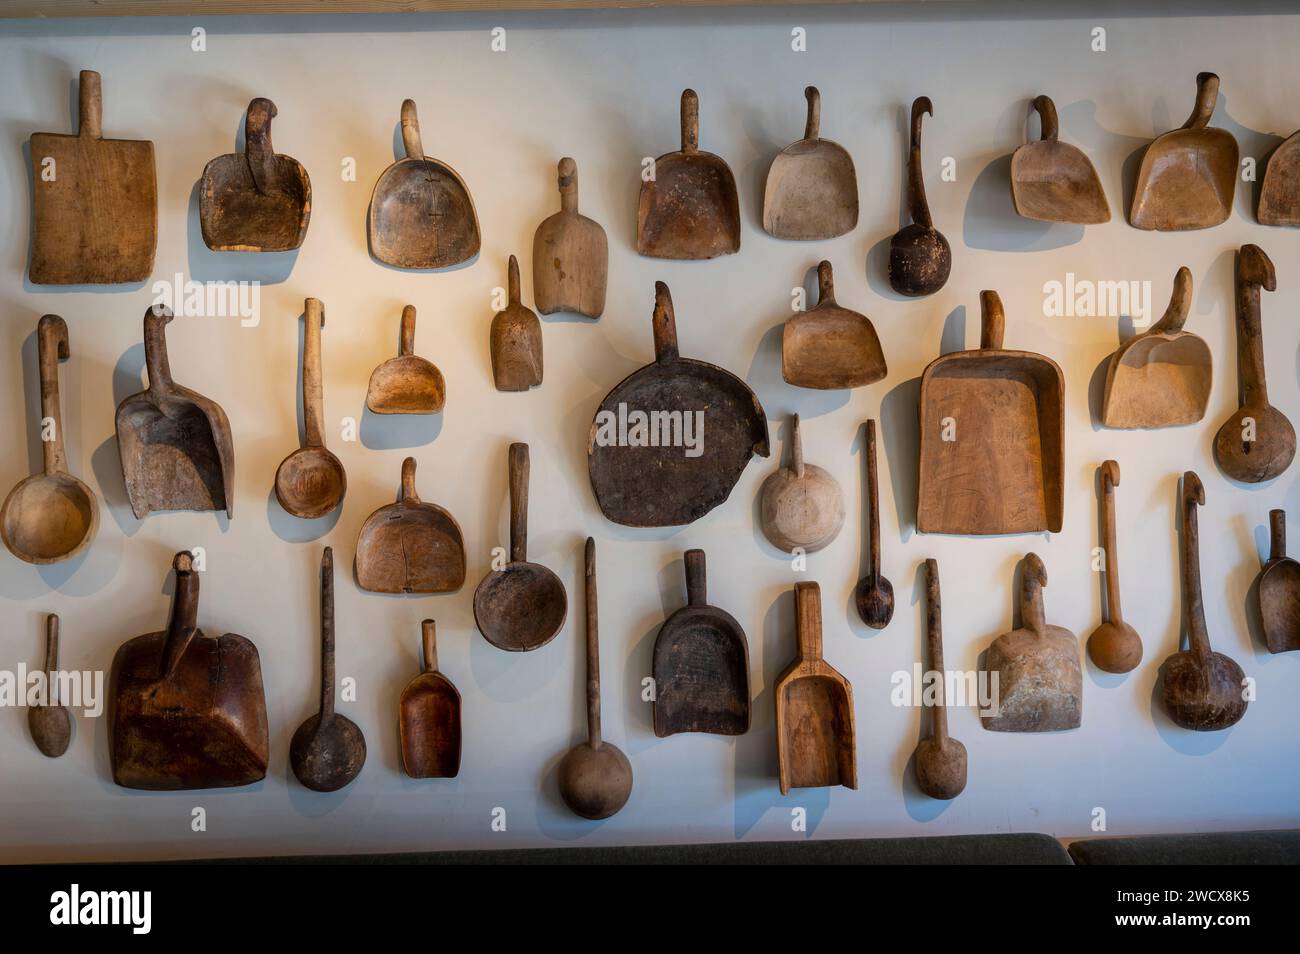 France, Haute Savoie, Megeve, 5-star hotel l'Alpaga, in the room of the restaurant Bistro de l'Alpaga, a collection of wooden curd shovels Stock Photo